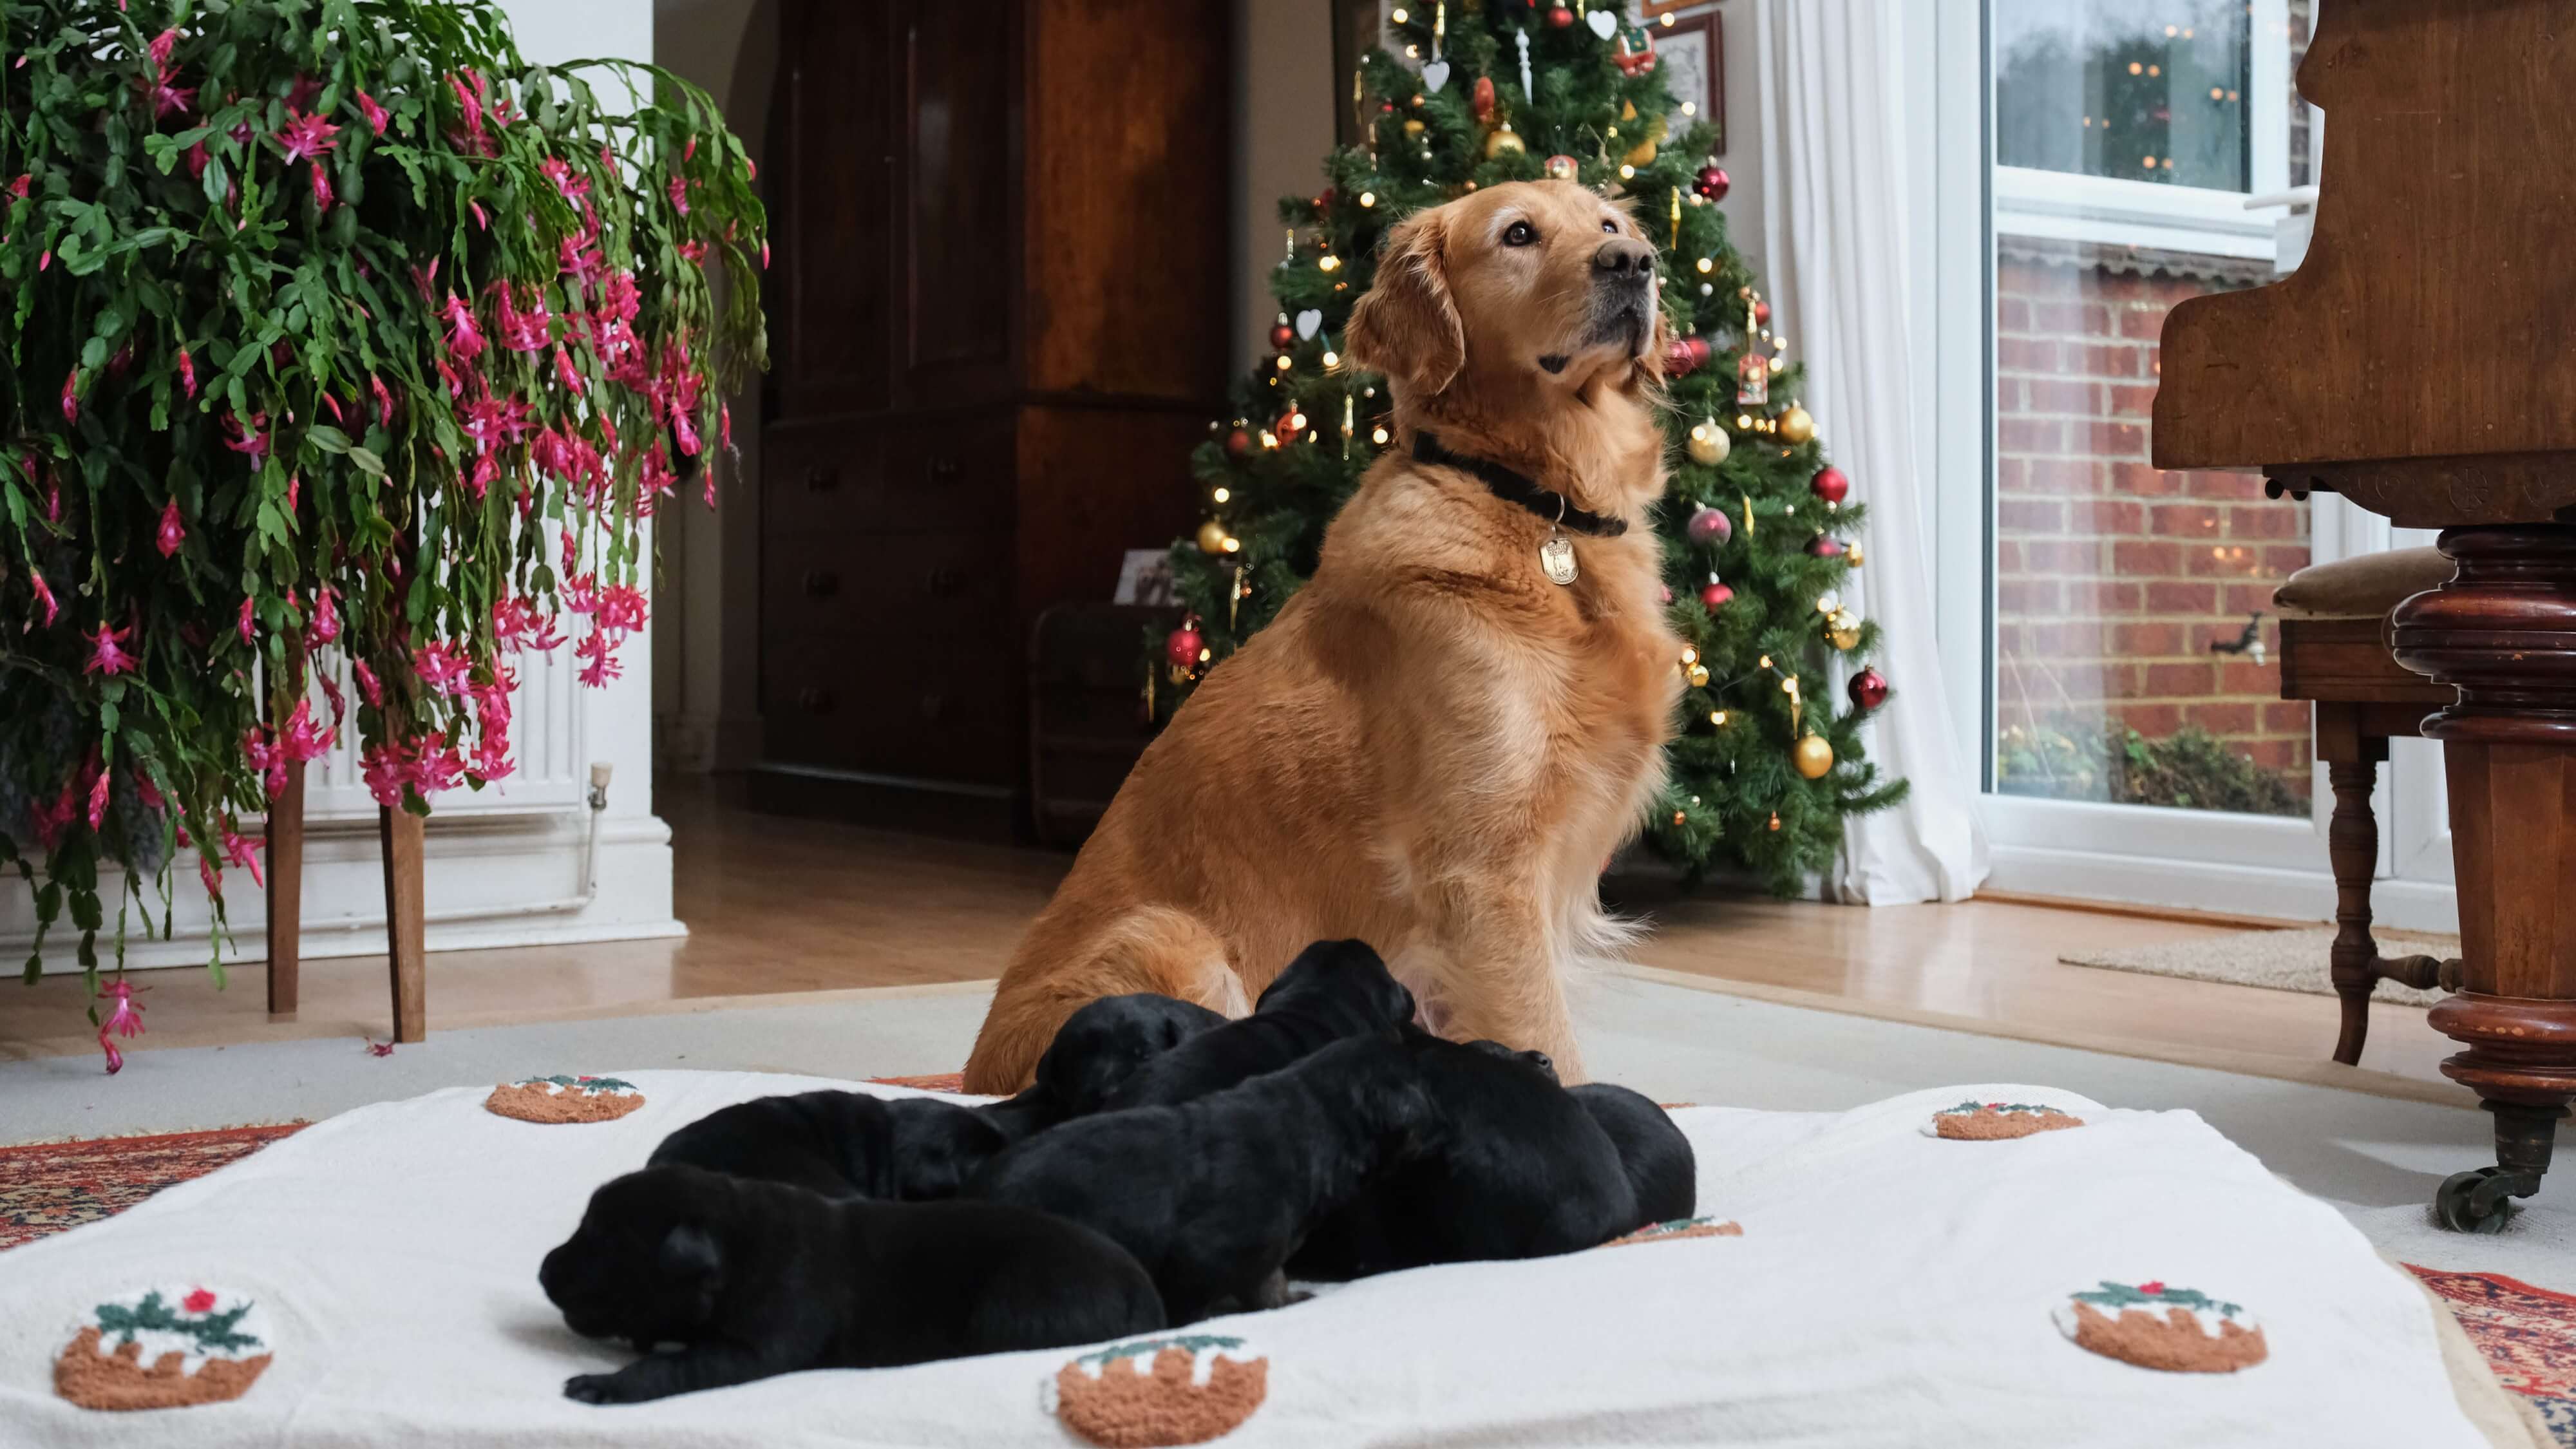 Golden retriever mum Puds sits proudly behind her litter of black puppies, who are resting together on a cream blanket covered in a Christmas pudding pattern. They are in a lounge with a Christmas tree and Christmas cactus in the background.